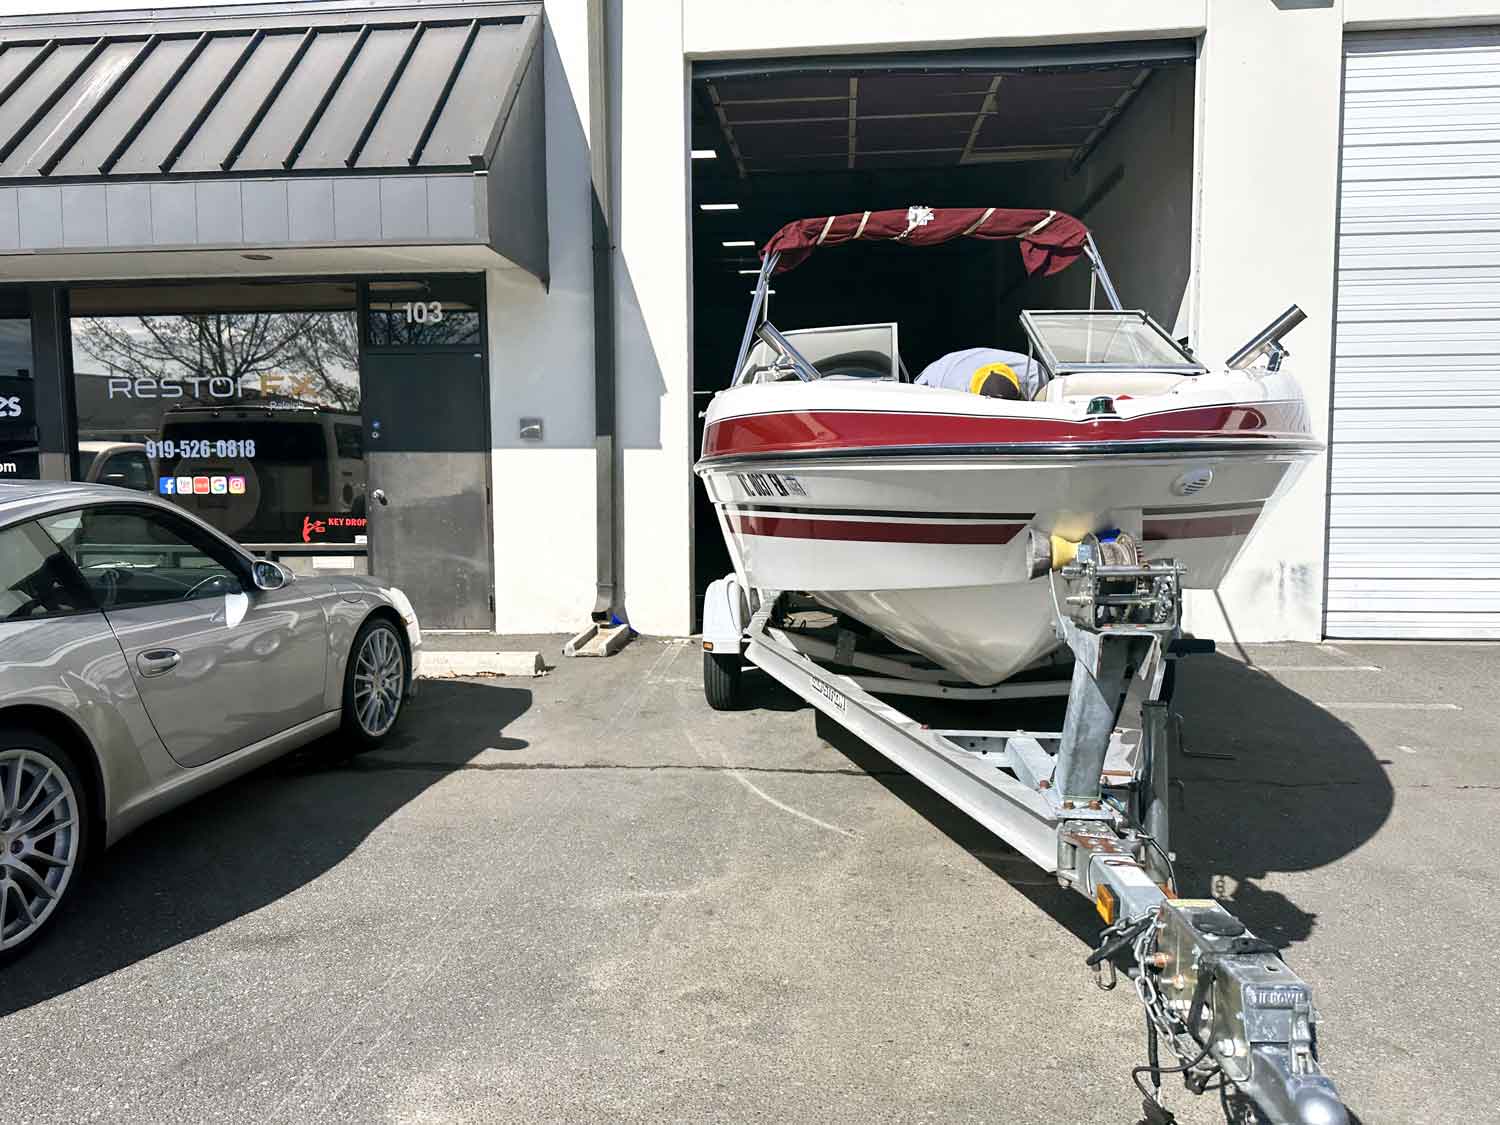 A boat parked in front of the RestorFX Raleigh center door with a branded window front